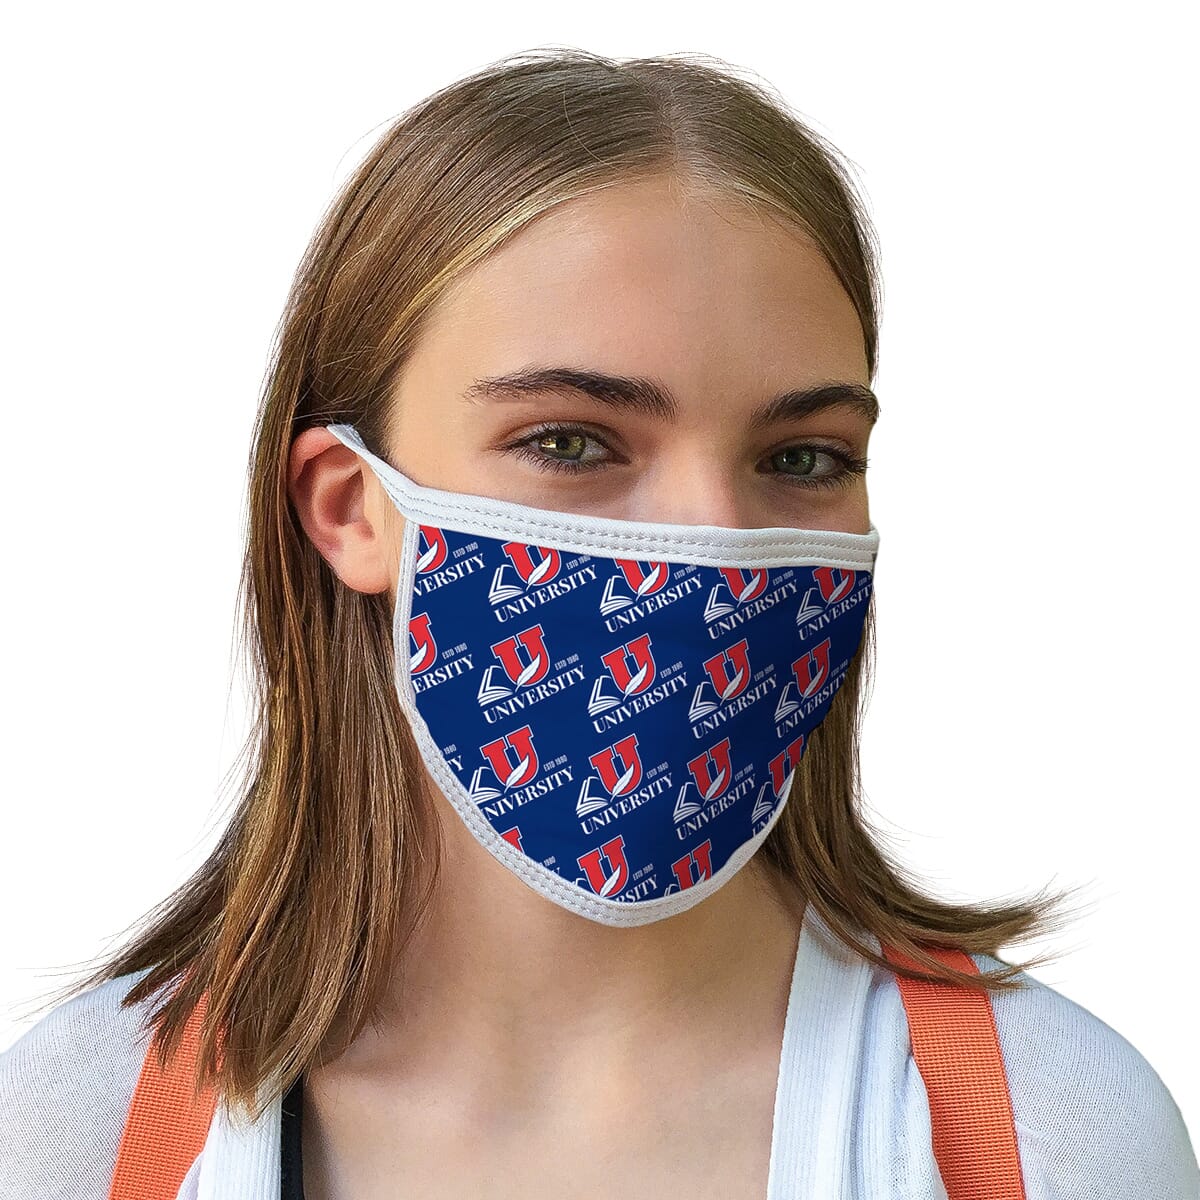 Fully Customized Reusable Face Mask